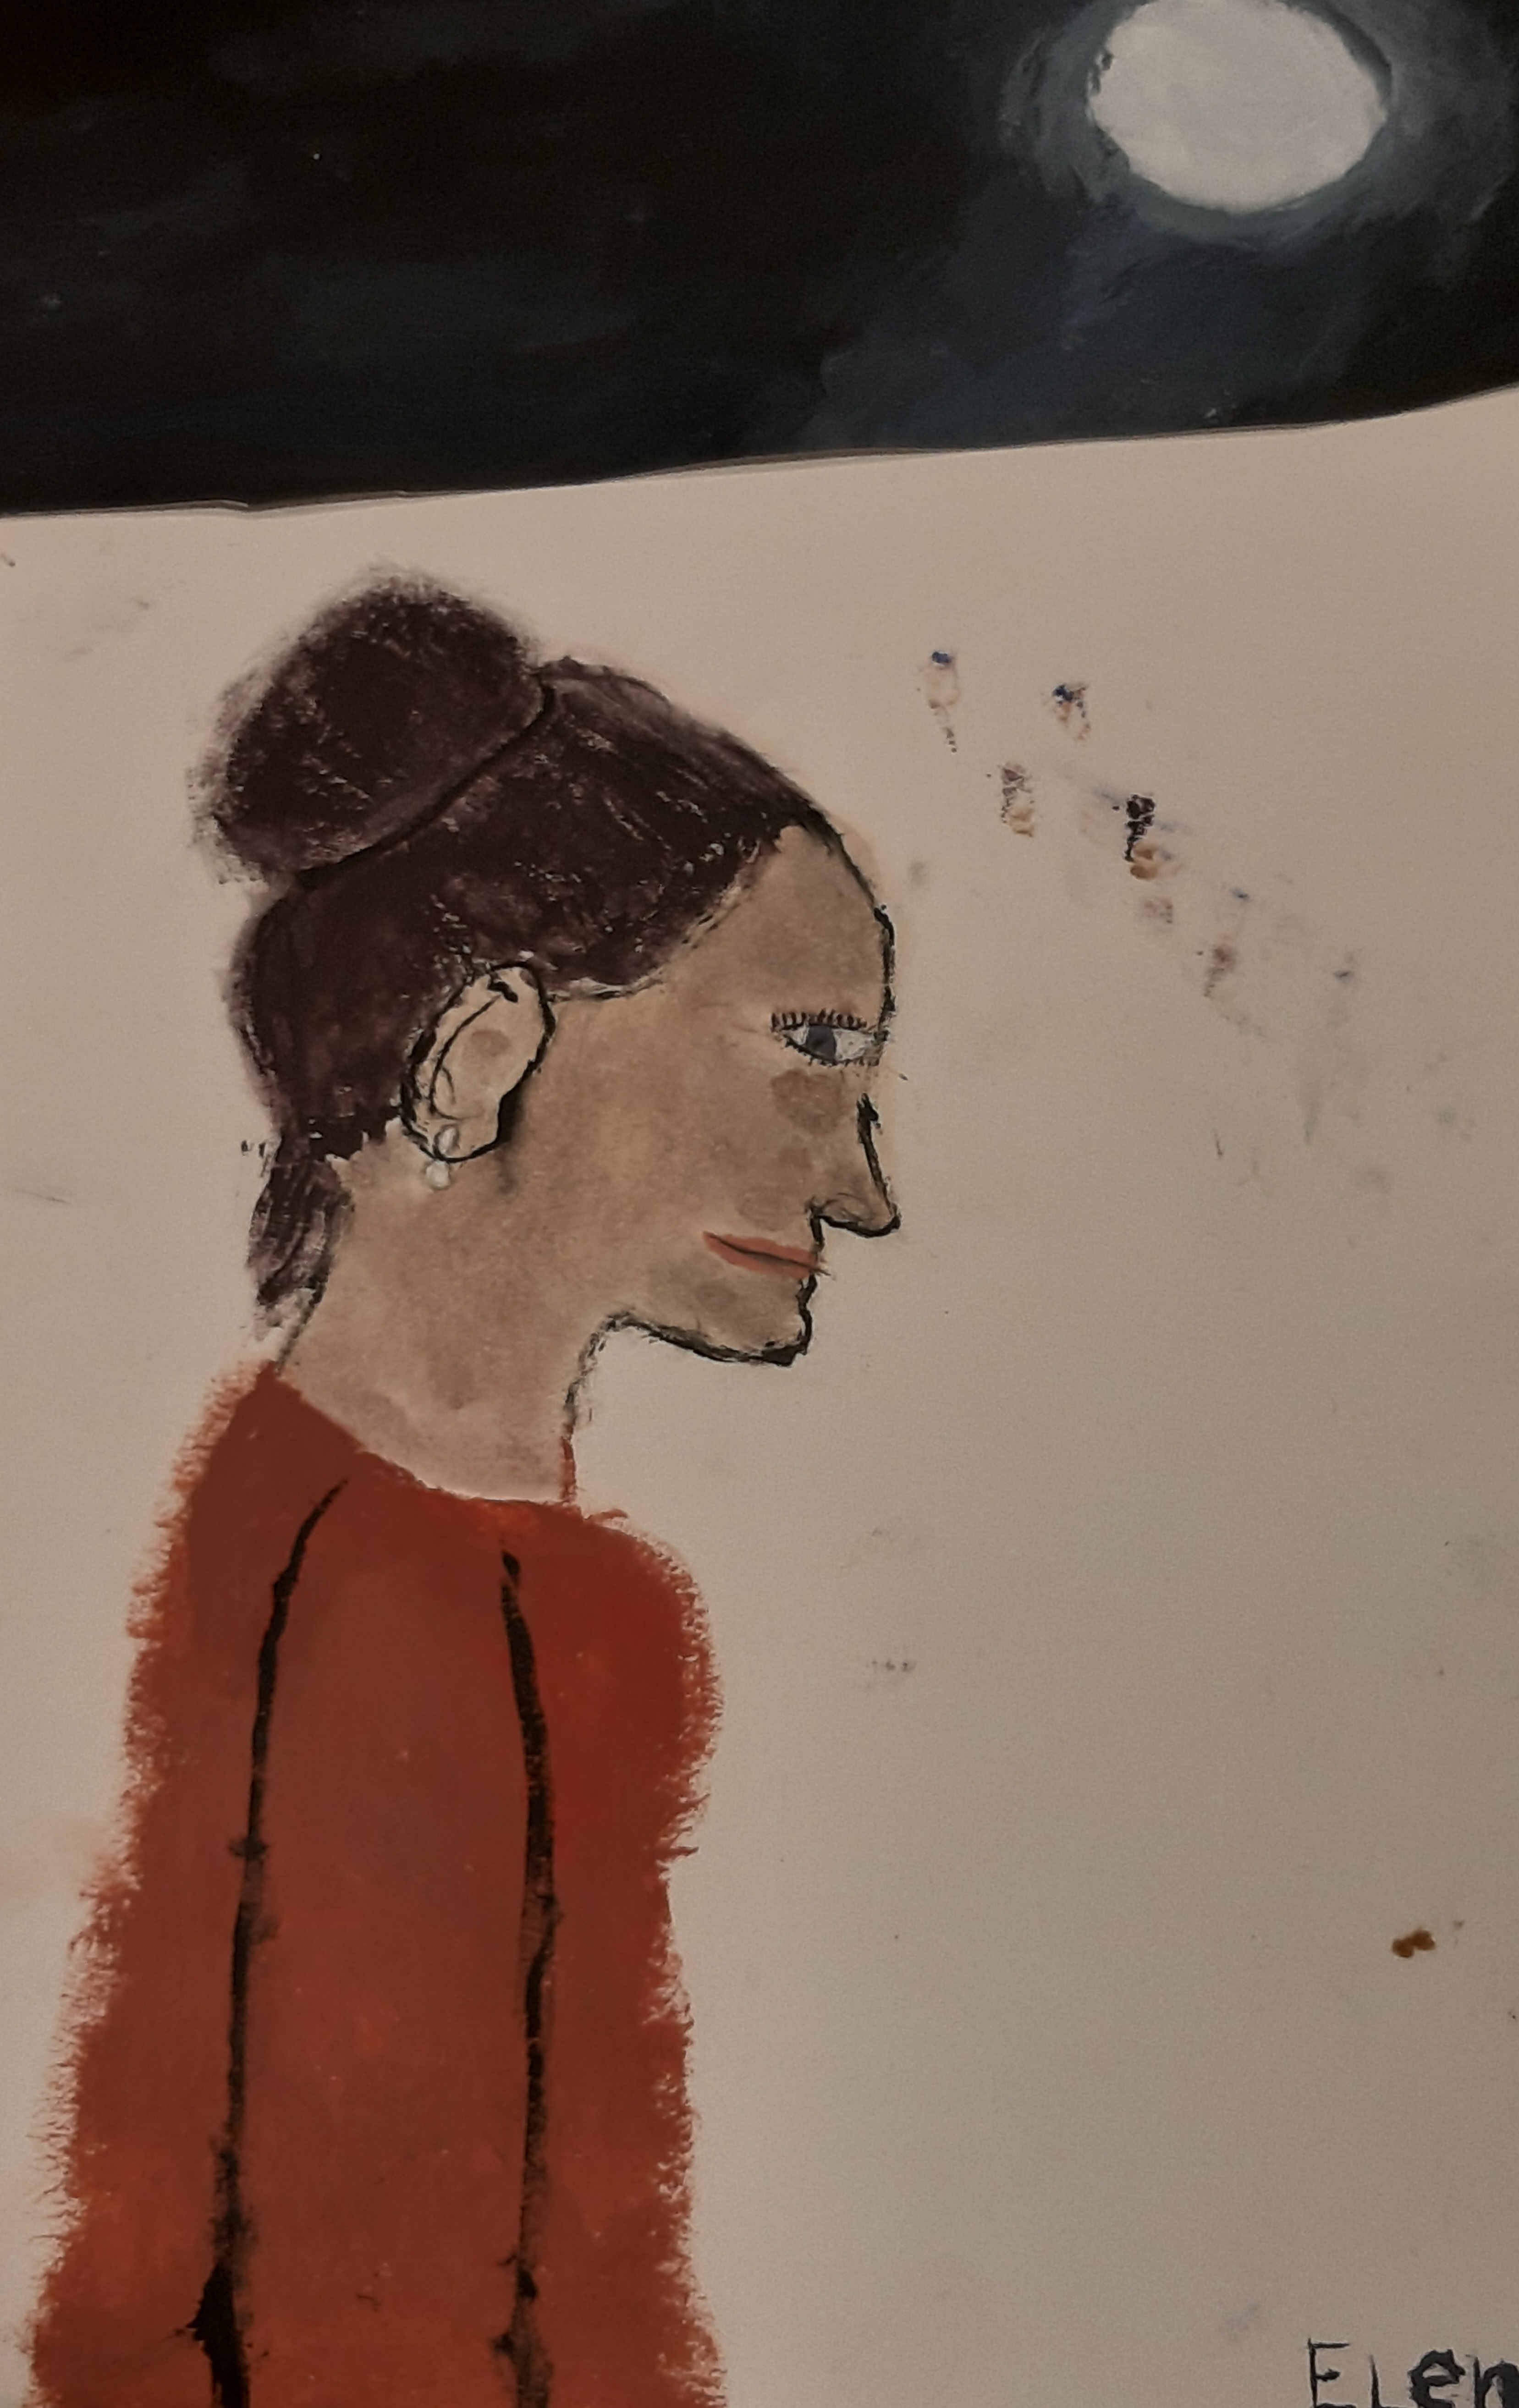 'Picture of Mum' by Clarkes () from Westmeath